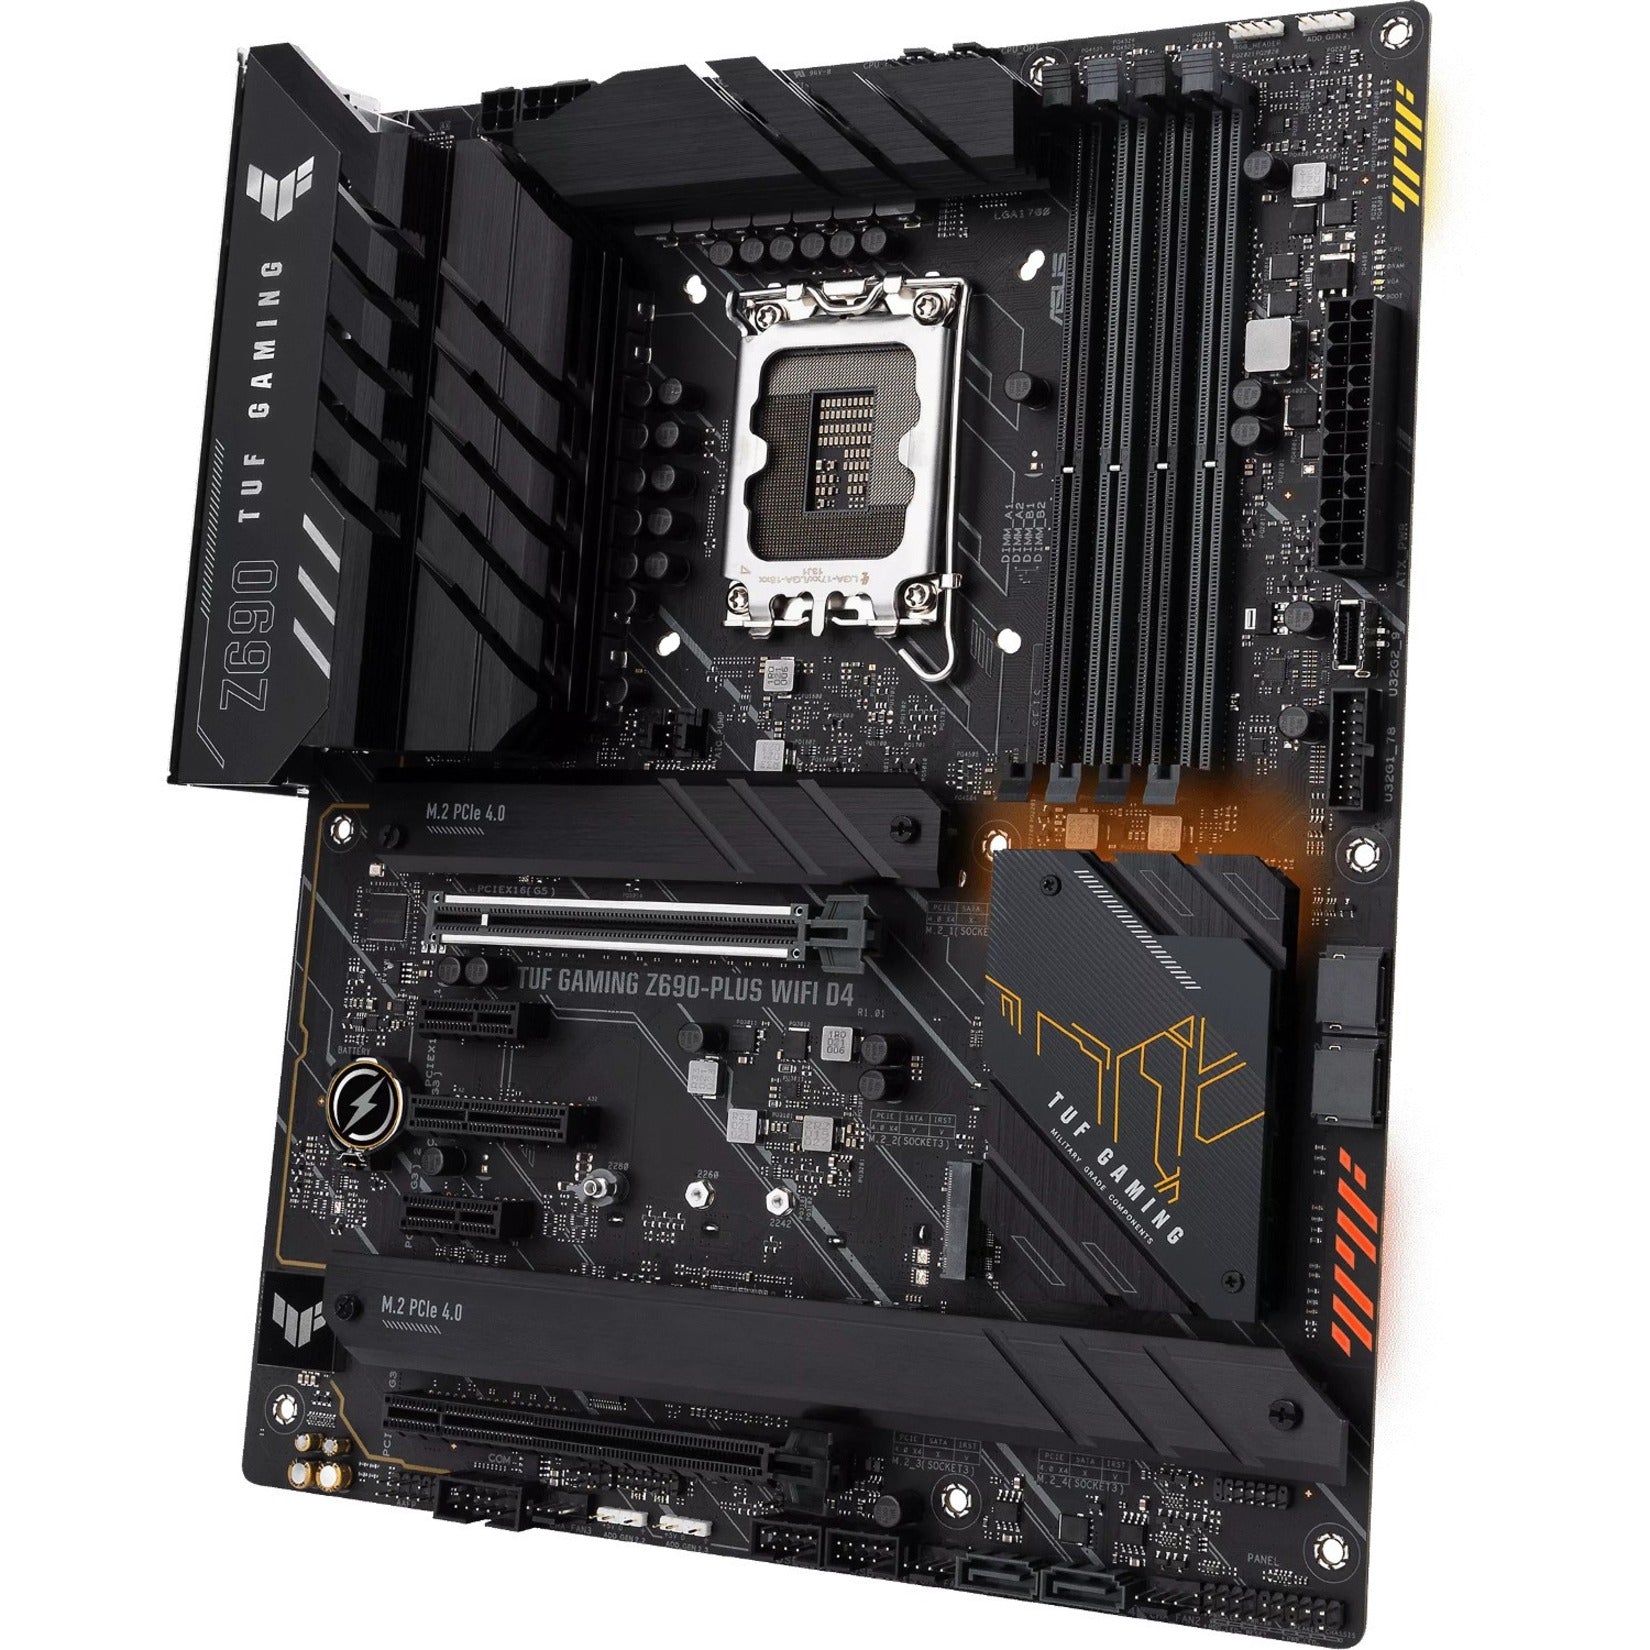 ASUS TUF GAMING Z690-PLUS WiFi D4 Desktop Motherboard TUF GAMING Z690-PLUS WIFI D4, Military-Grade Components, Game-Ready Features, 12th Gen Intel Core Processor Support